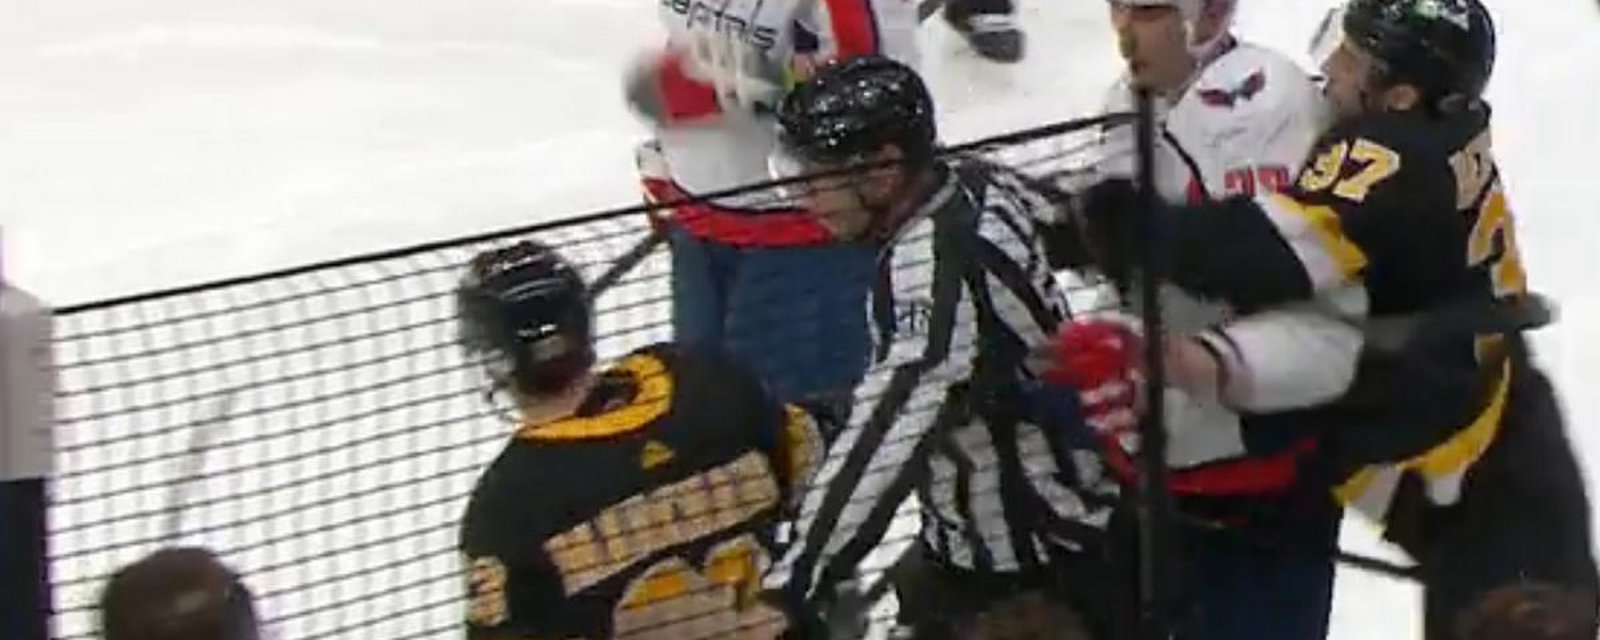 Patrice Bergeron restrains Zdeno Chara as he goes after Brad Marchand.